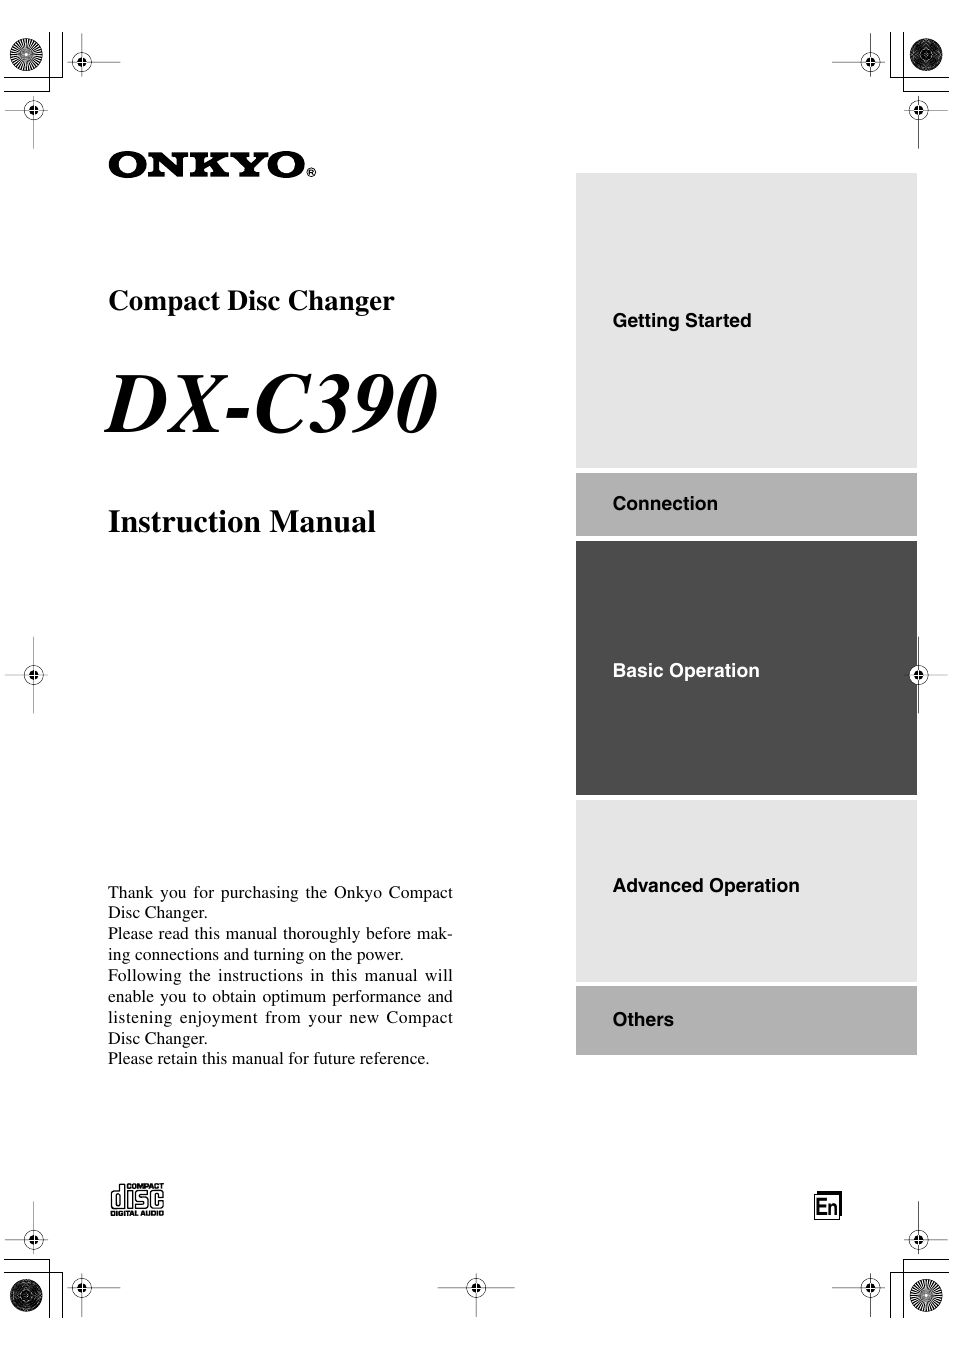 Onkyo DX-C390 Compact Disc Changer  Owner's Manual Operating Instructions 